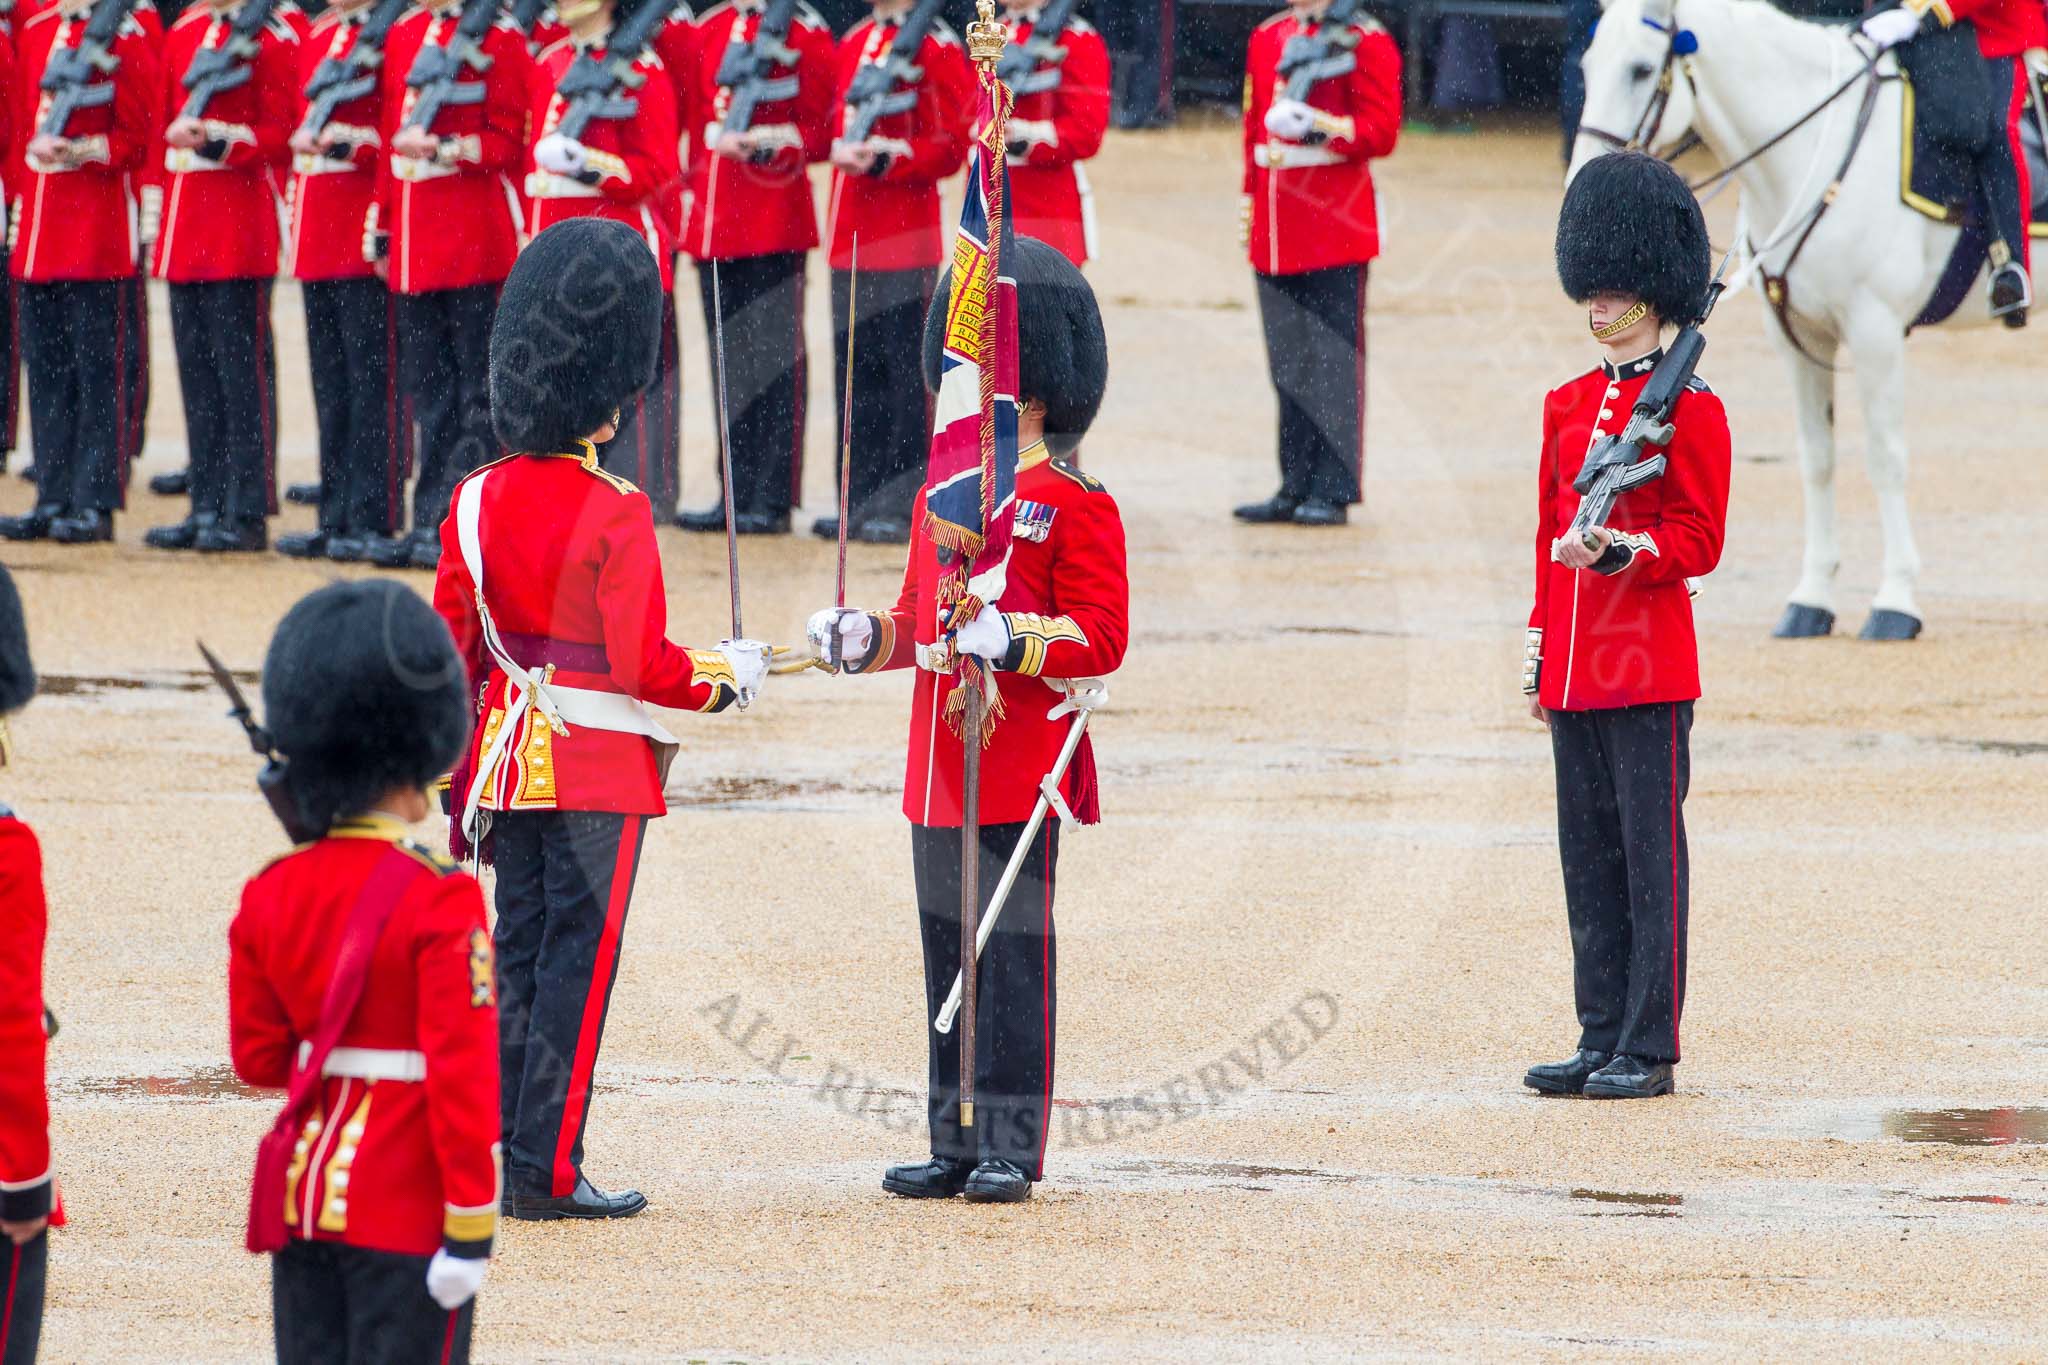 The Colonel's Review 2014.
Horse Guards Parade, Westminster,
London,

United Kingdom,
on 07 June 2014 at 11:19, image #391